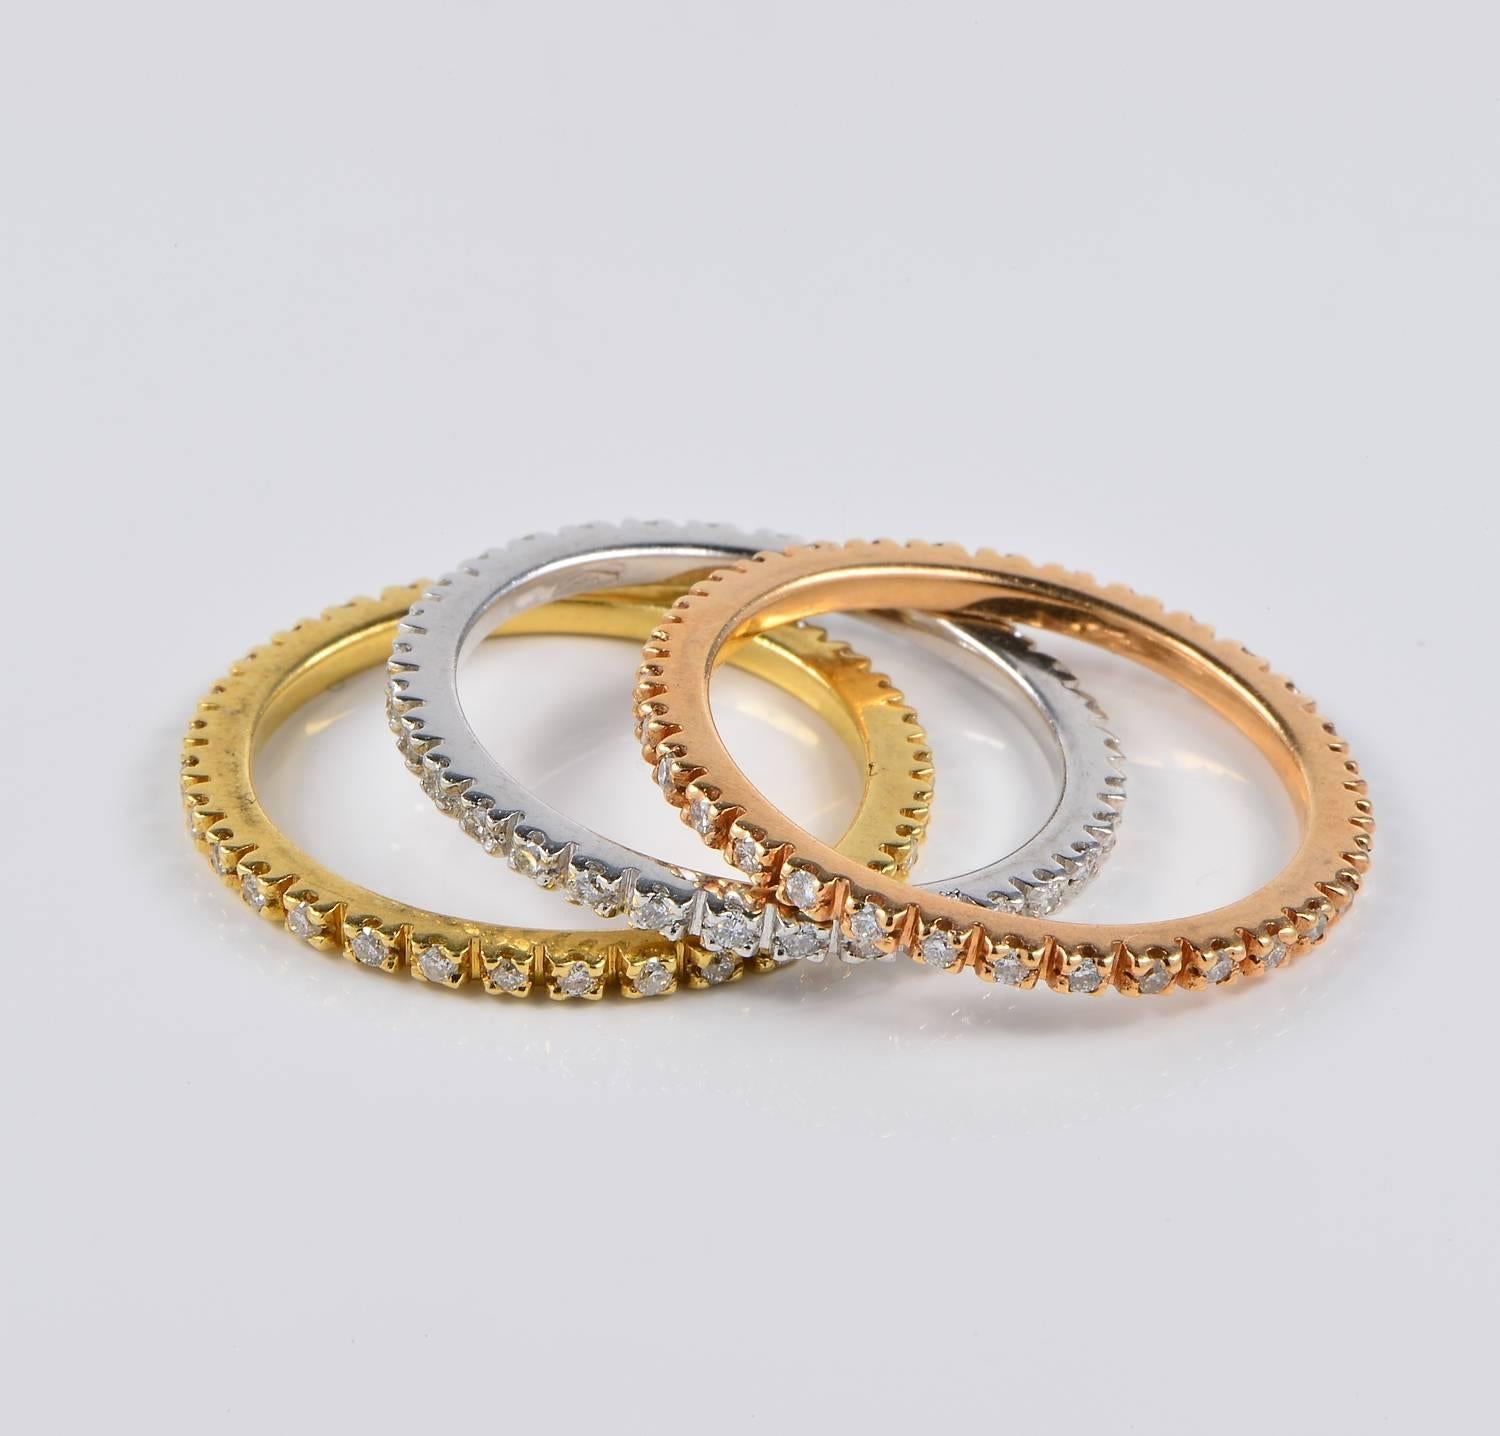 Symbolizing eternity; three full hoops set with Diamonds running through with neverending sparkle.
Hand crafted of solid 18 KT gold - three gold colours: Yellow, White and Rose.
Italian origin. 
Each hoop is set with 32 tiny Diamonds - the three